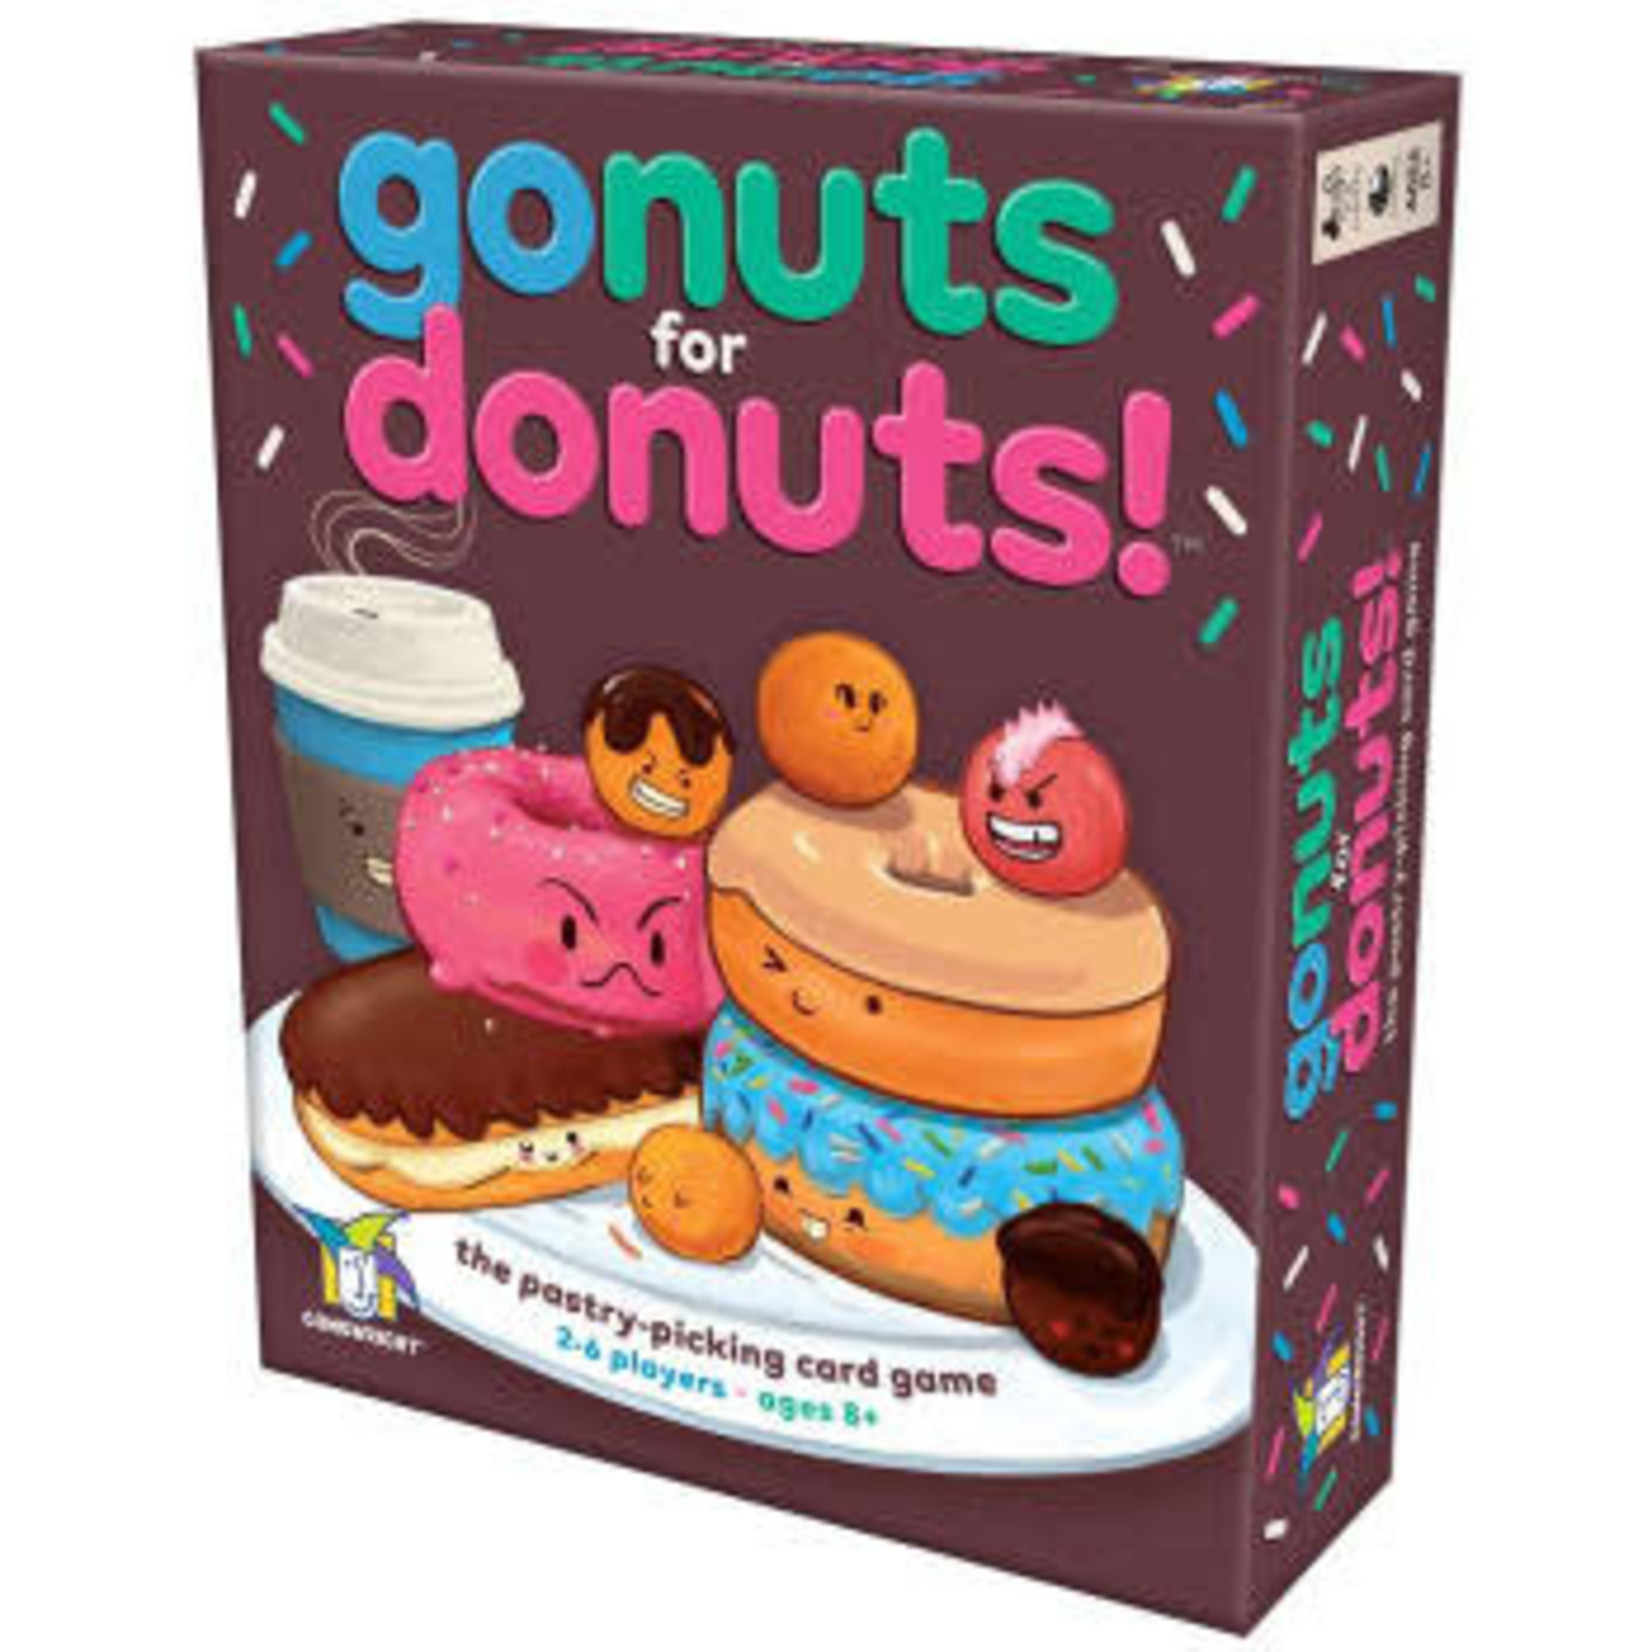 Gamewright Go Nuts for Donuts